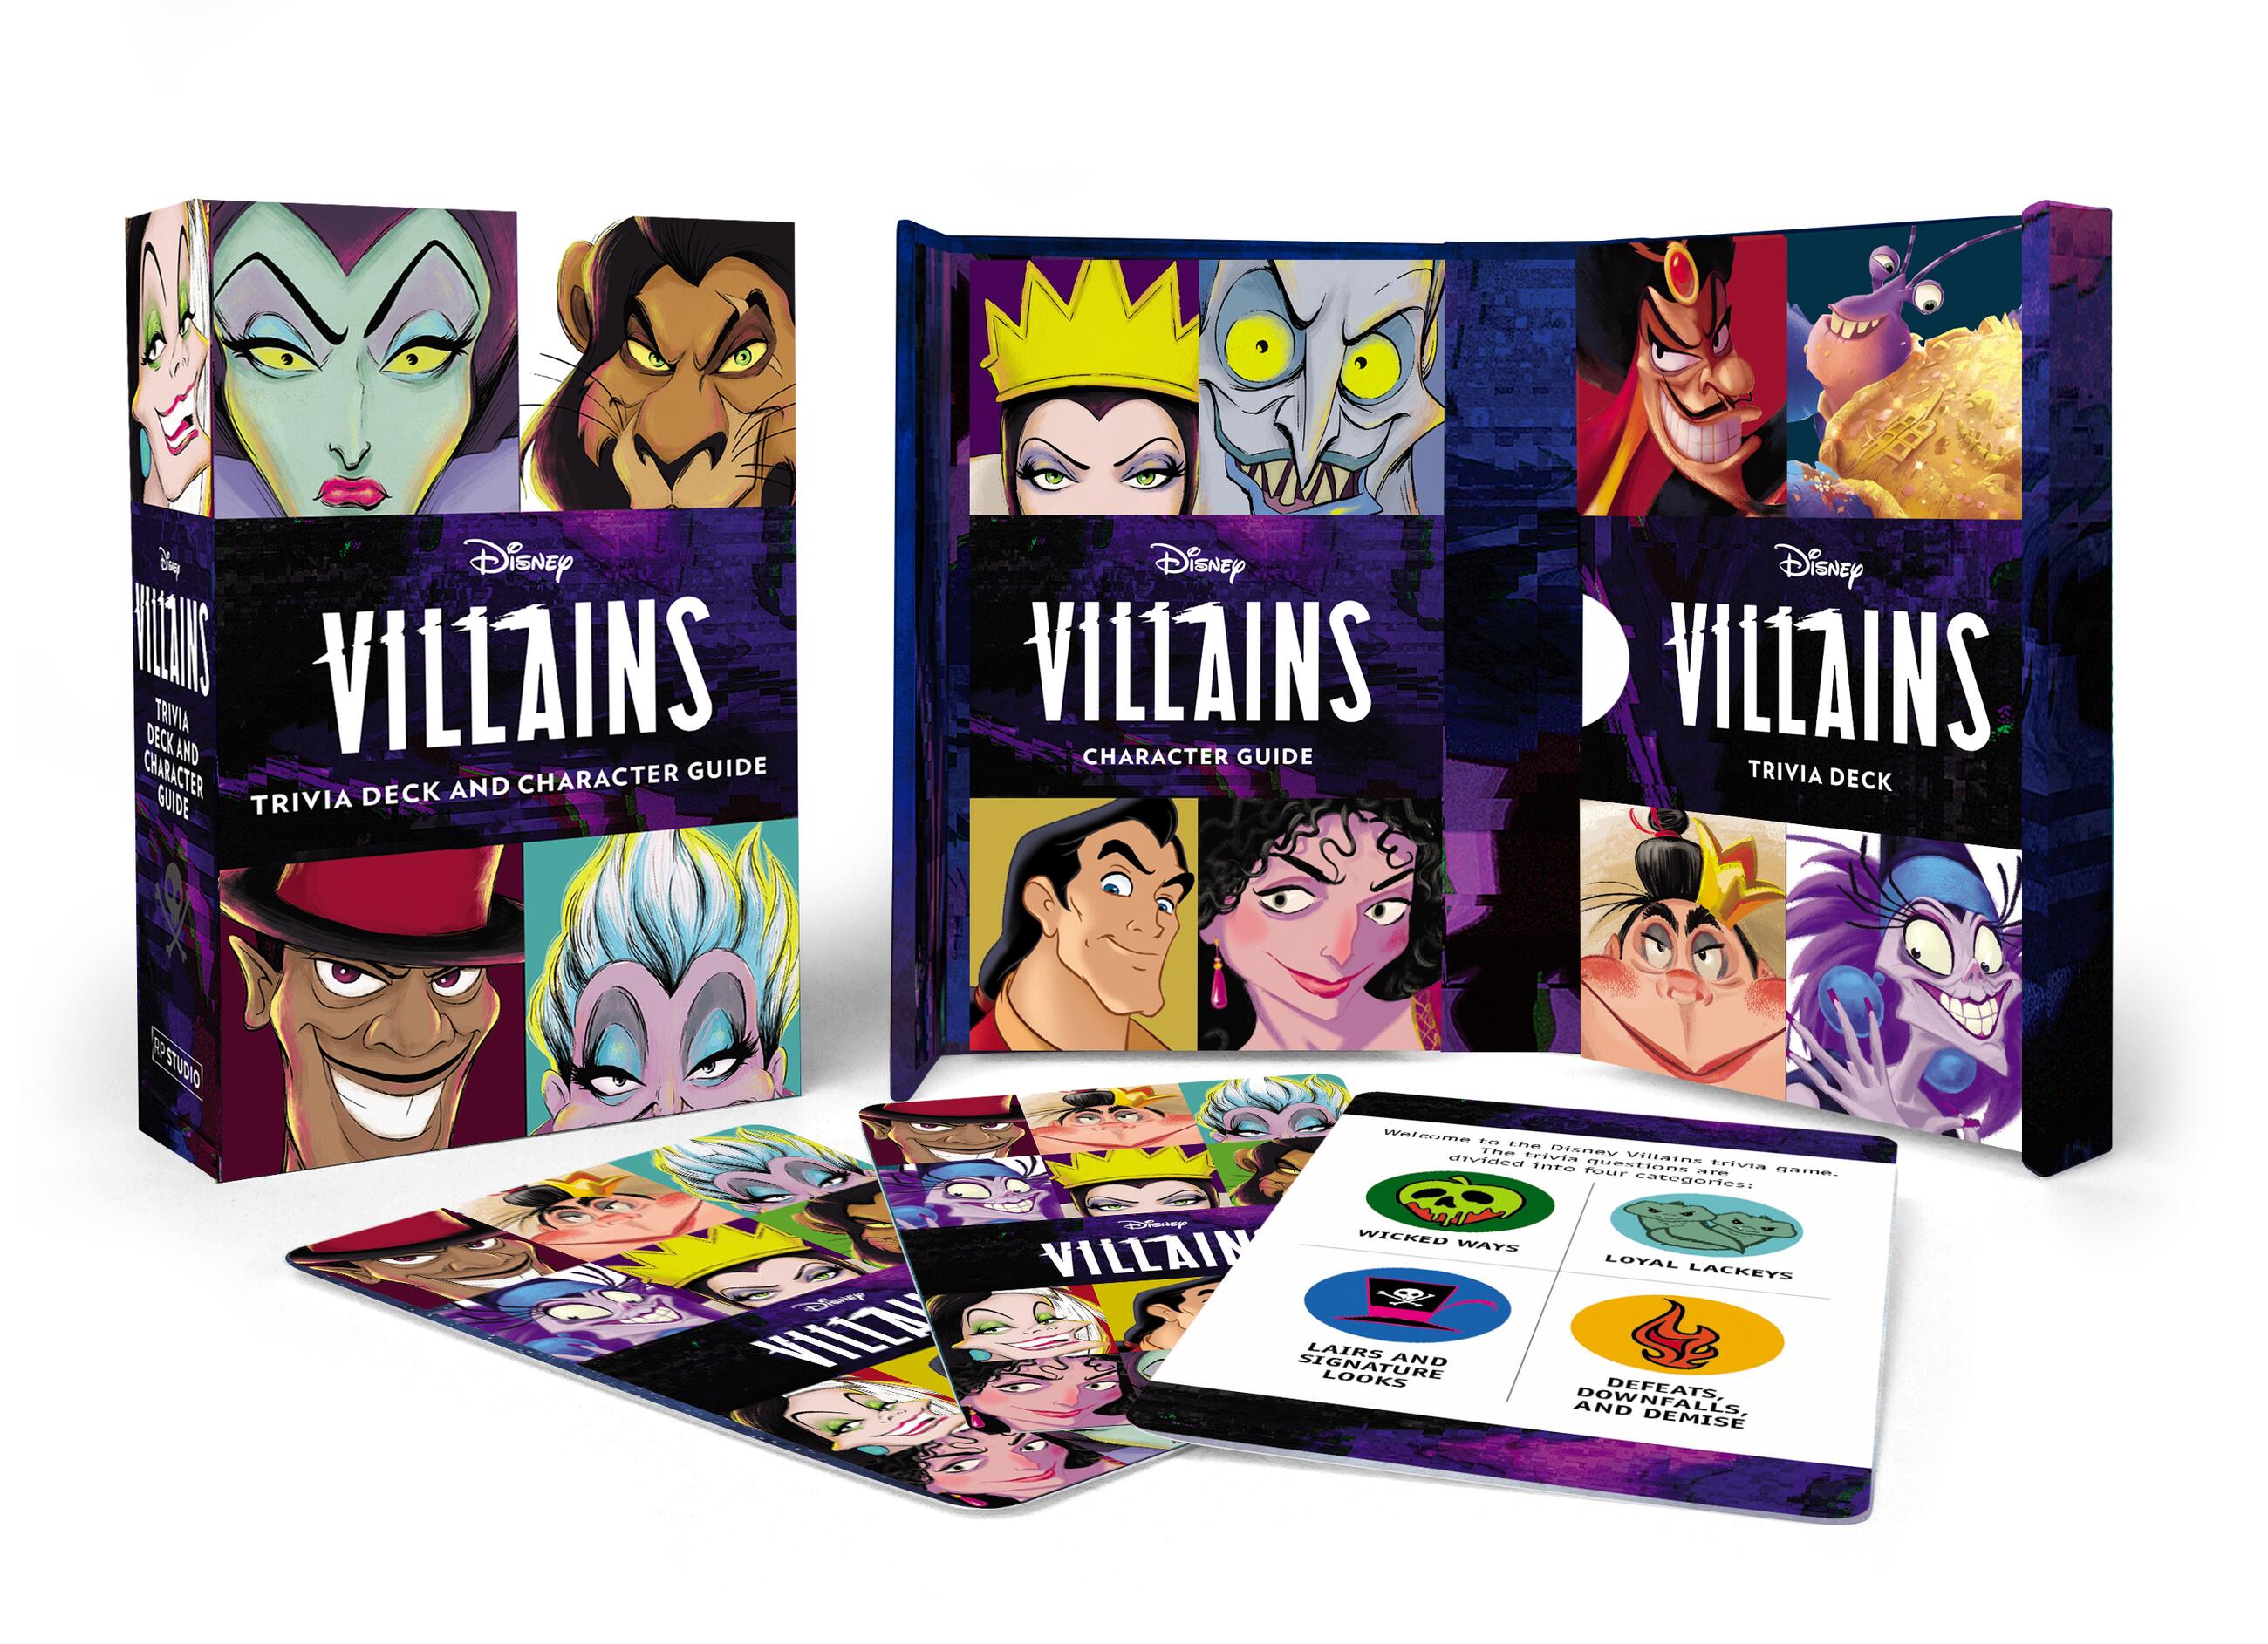 Disney Villains Trivia Deck and Character Guide by Christine